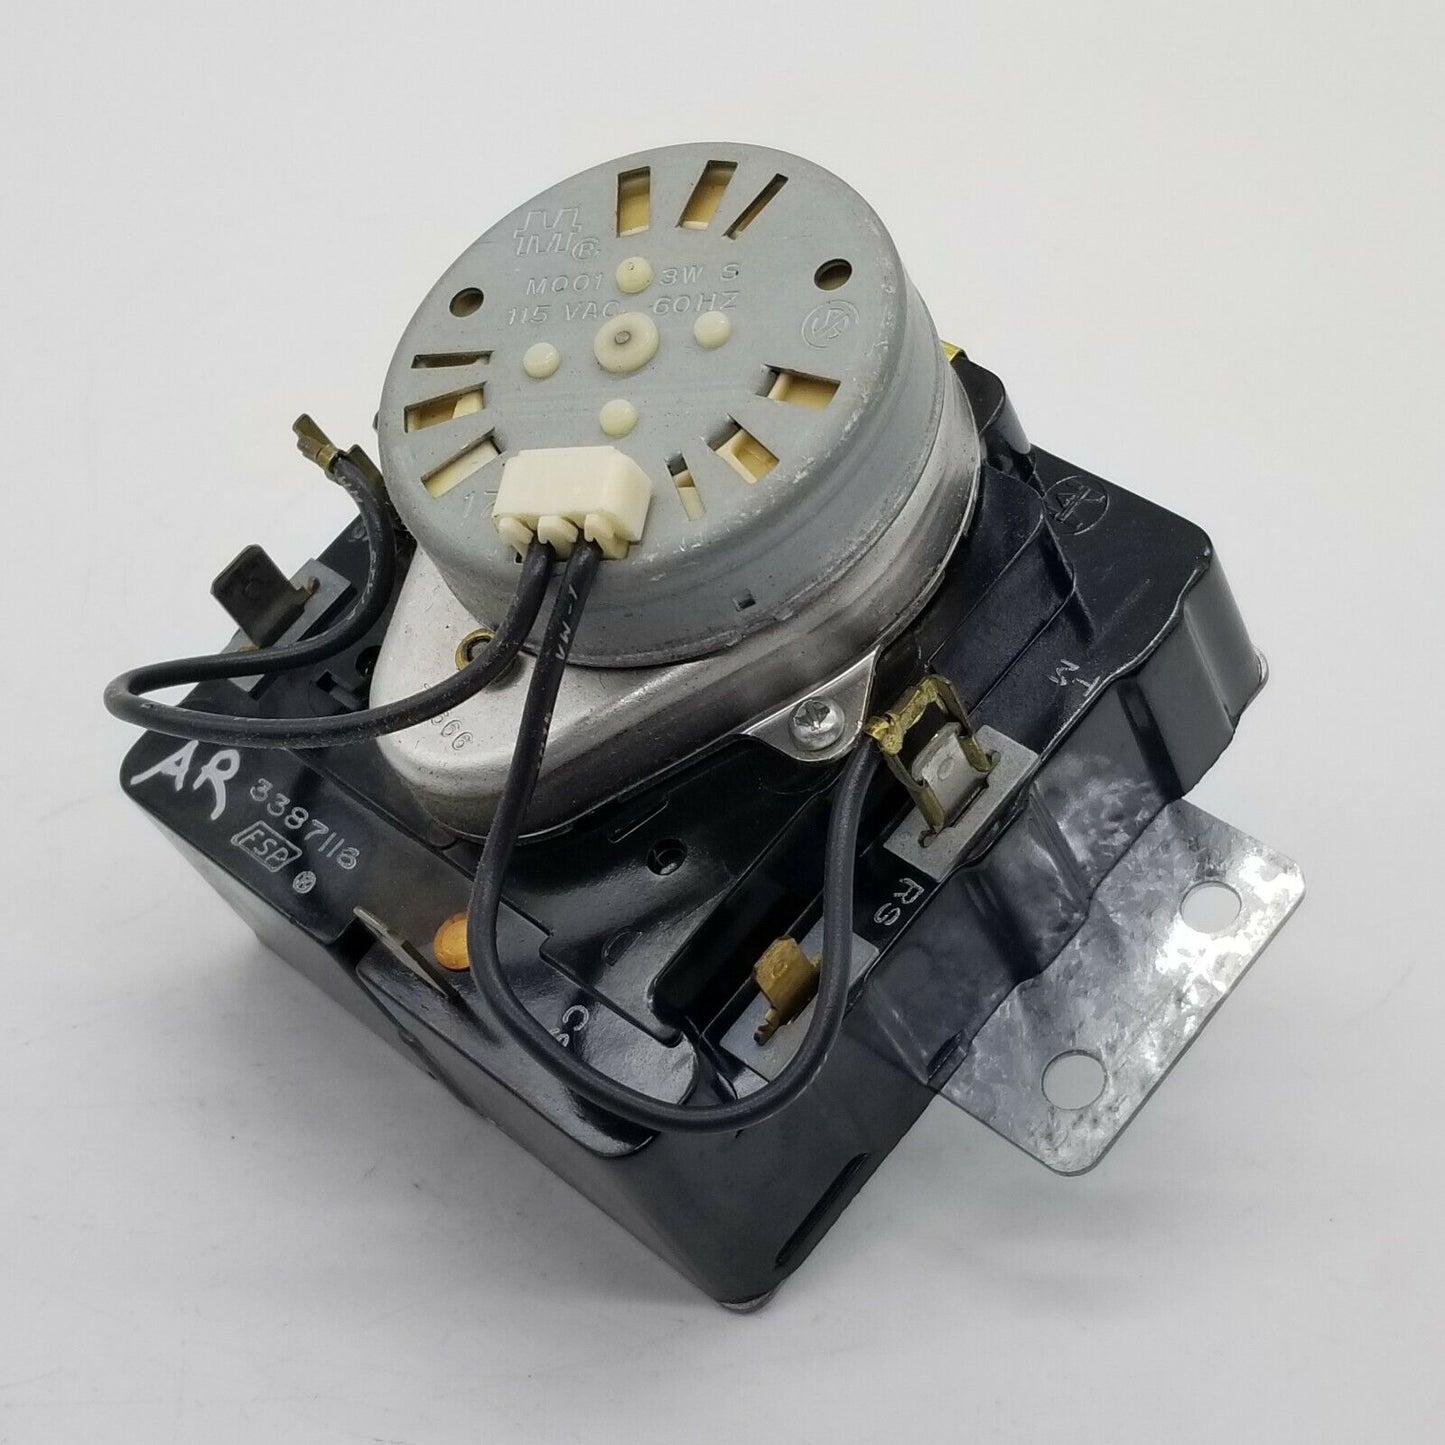 Genuine OEM Replacement for Whirlpool Dryer Timer 3387116